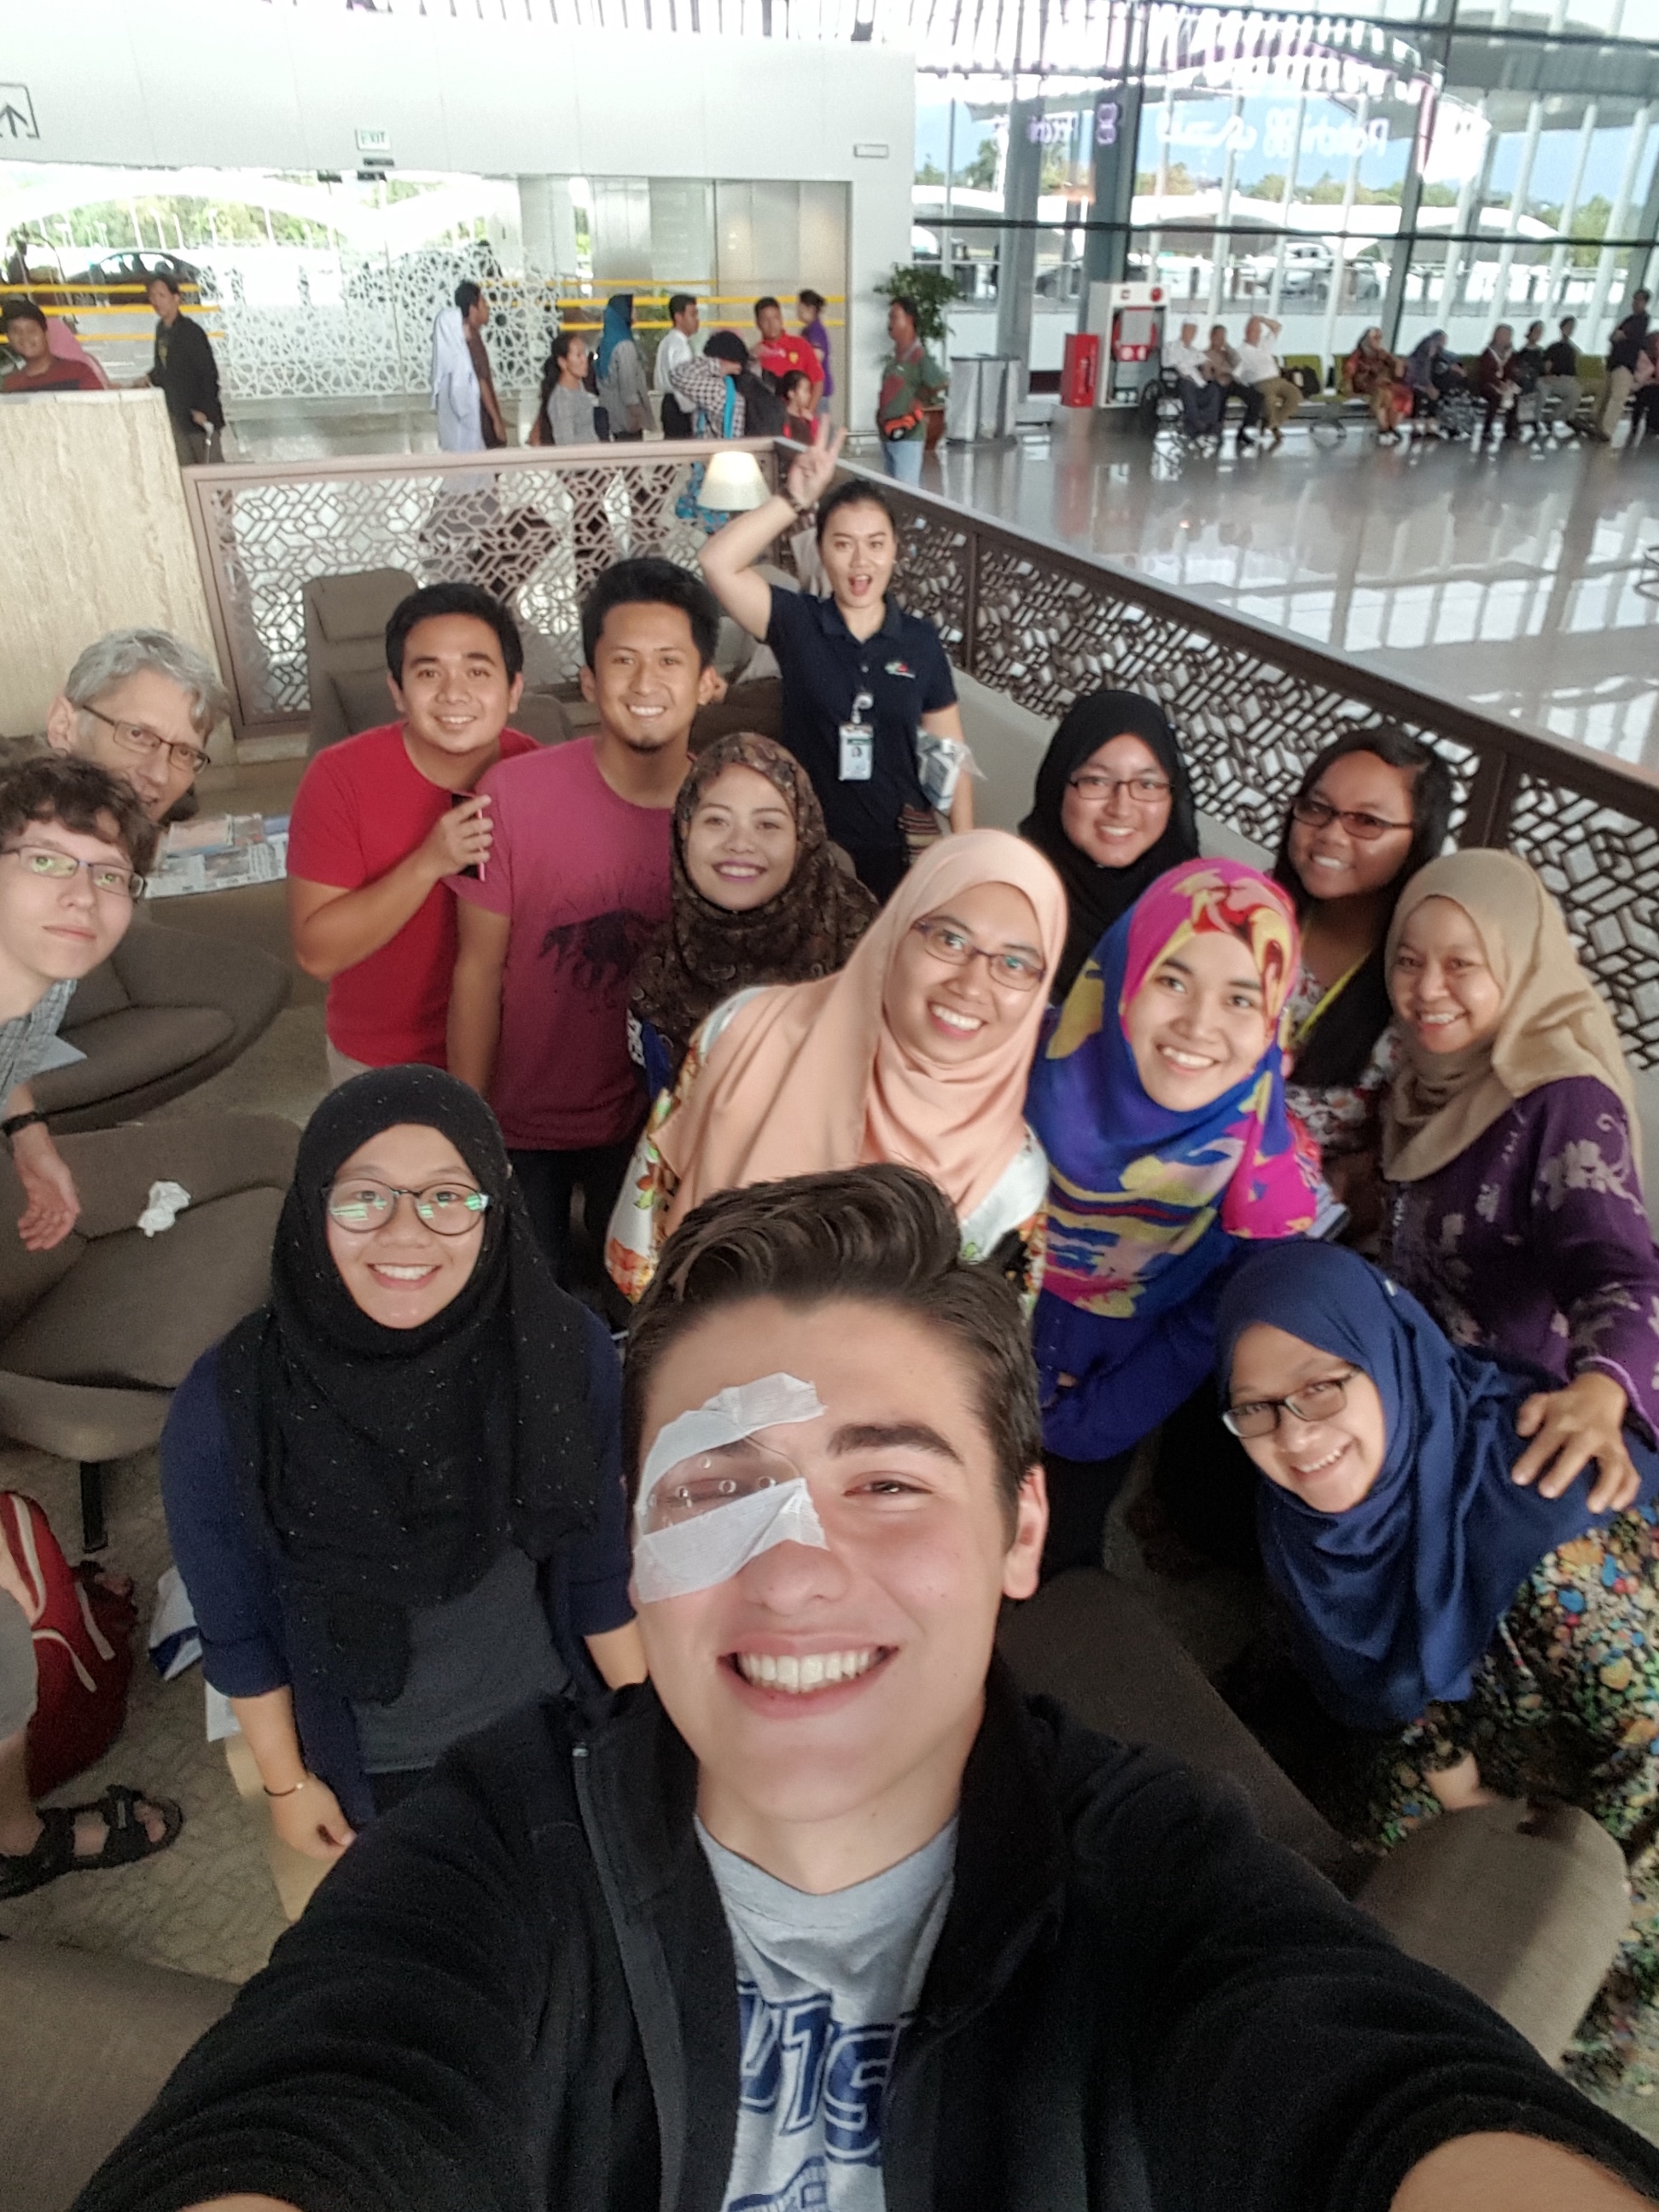 Hilton spending time with the rest of the Bruneian students and Faculty before returning to the United States.